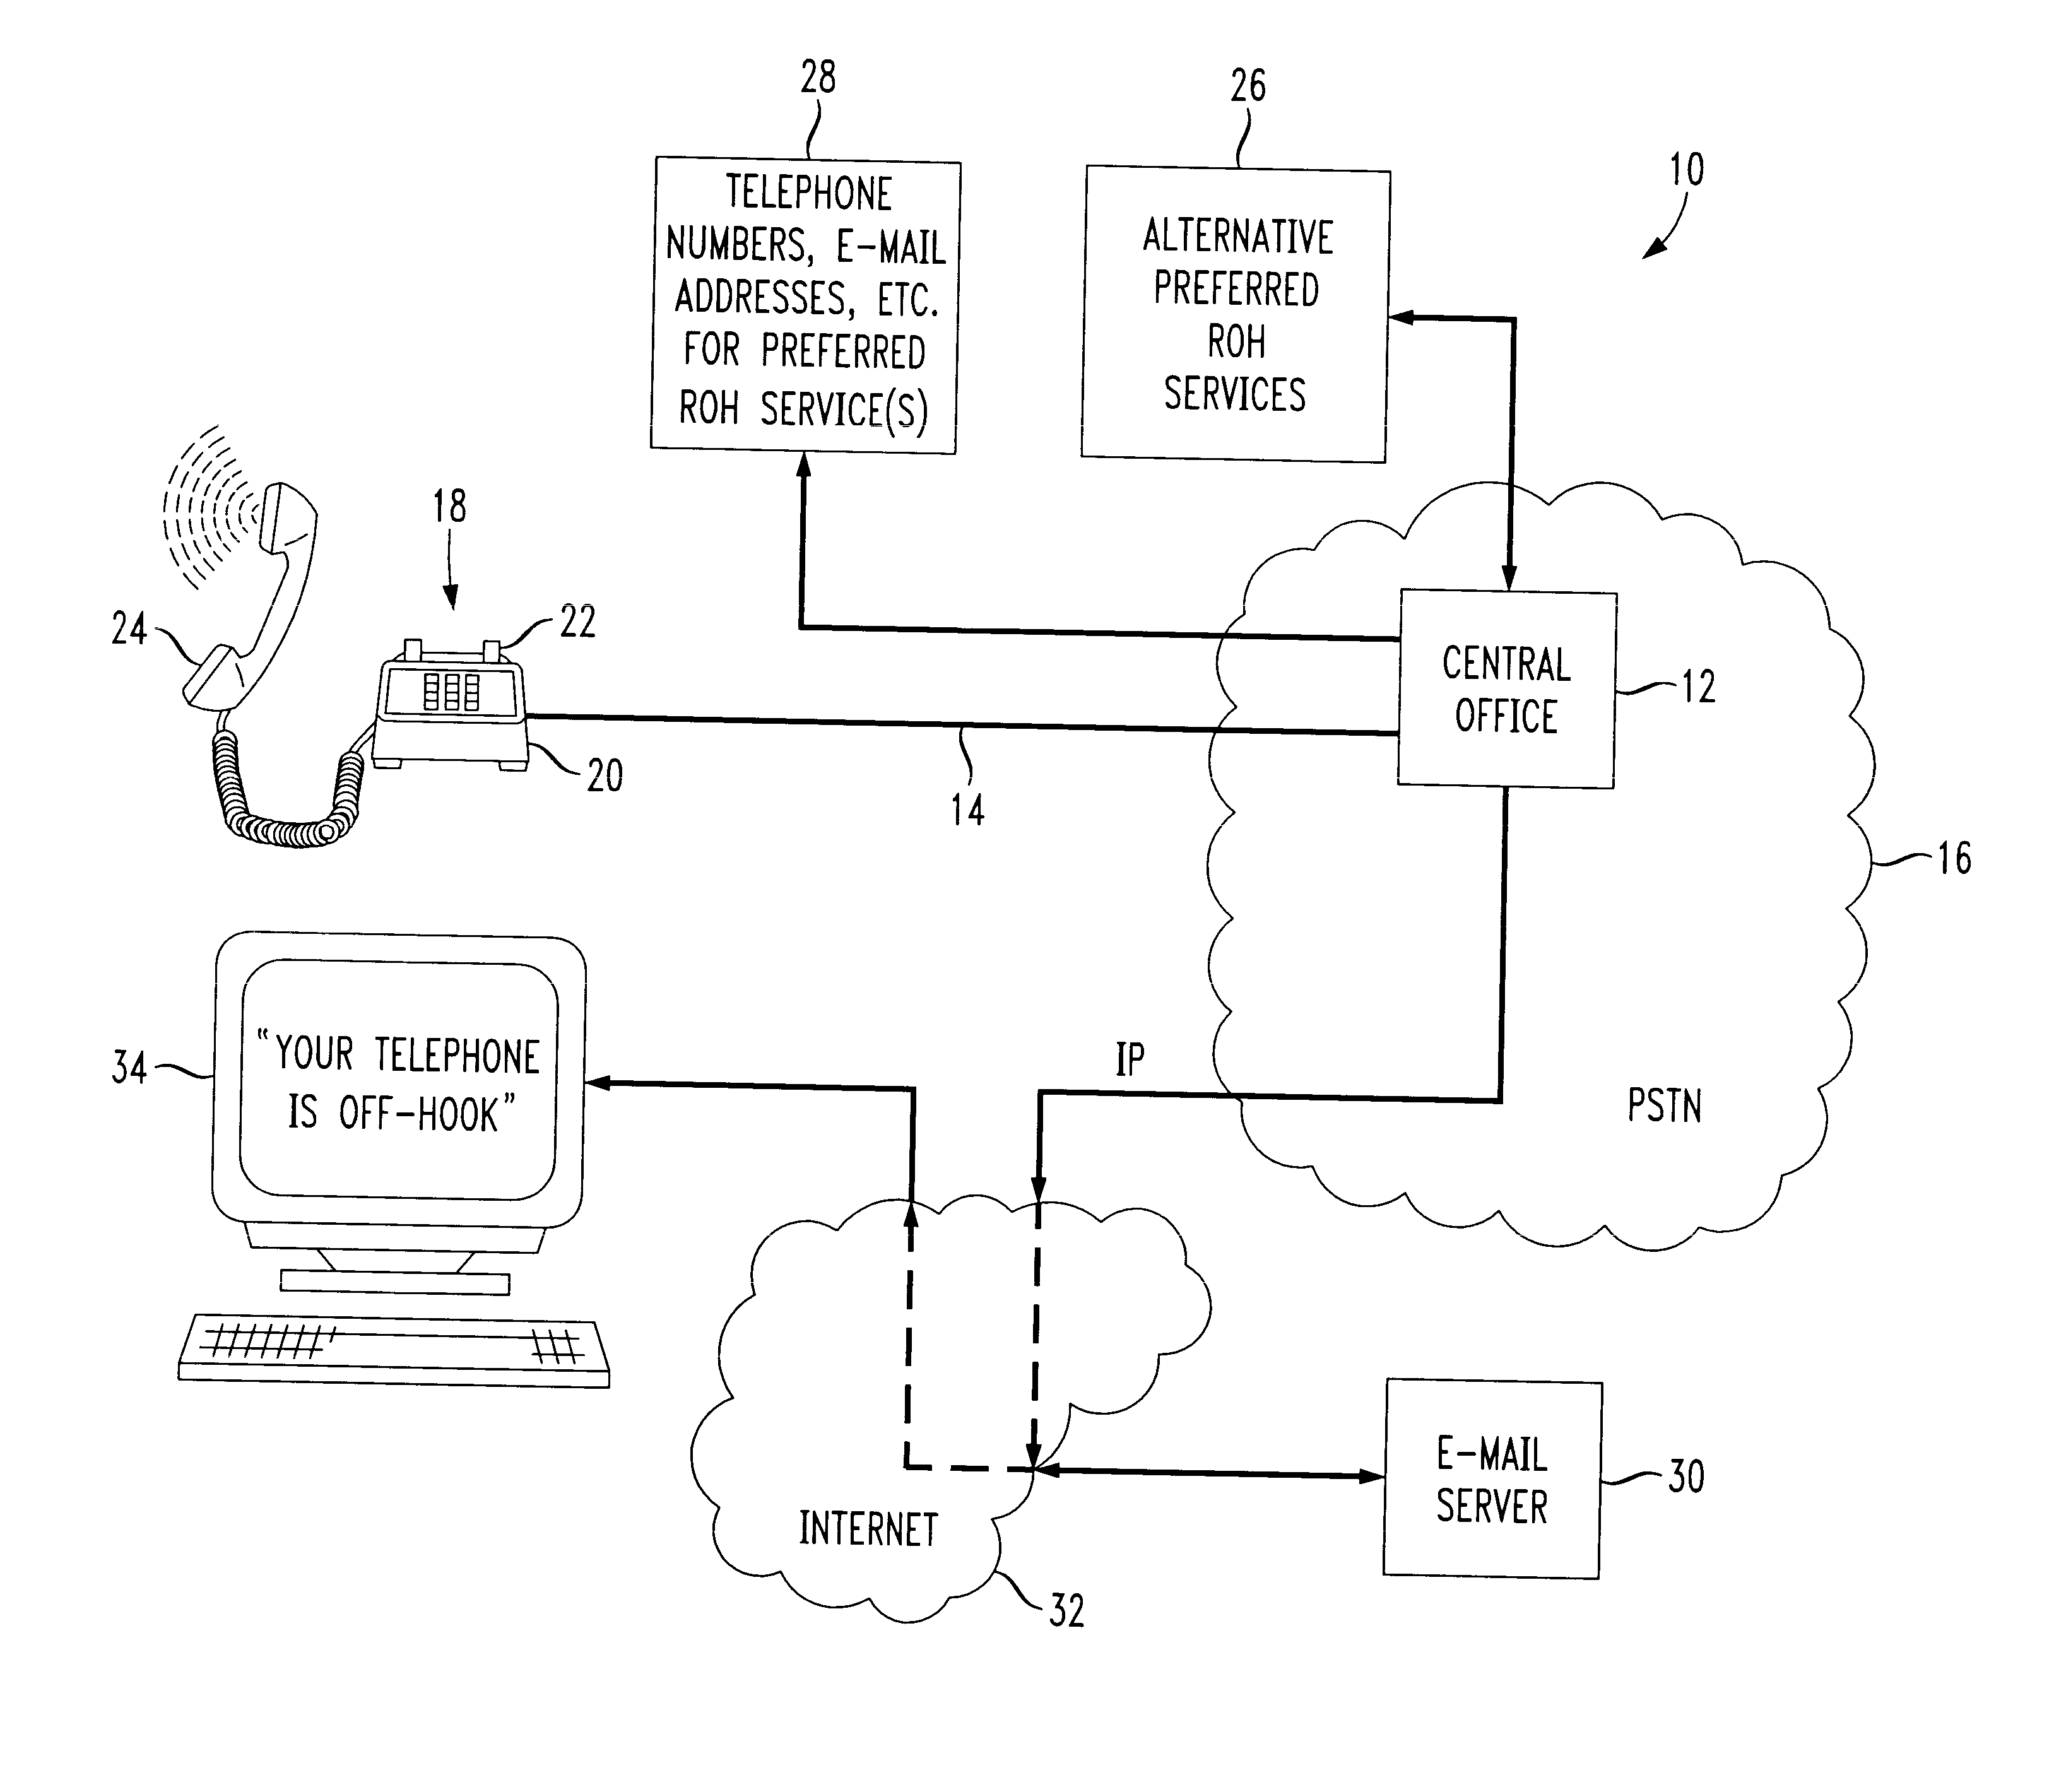 Extended off-hook notification via electronic communications